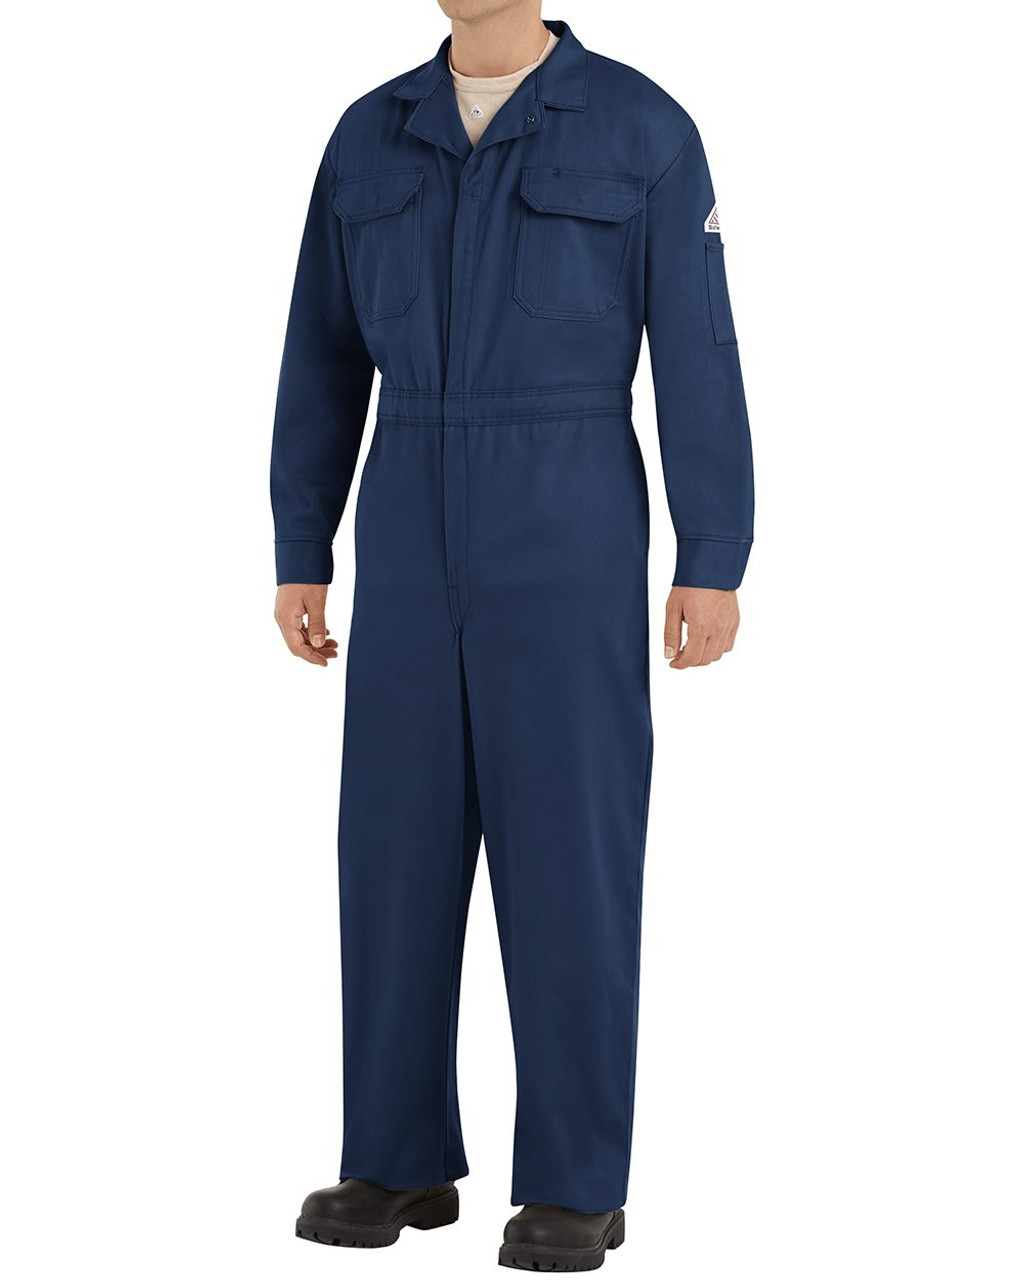 Embroidered Flame Resistant Coveralls - CED2